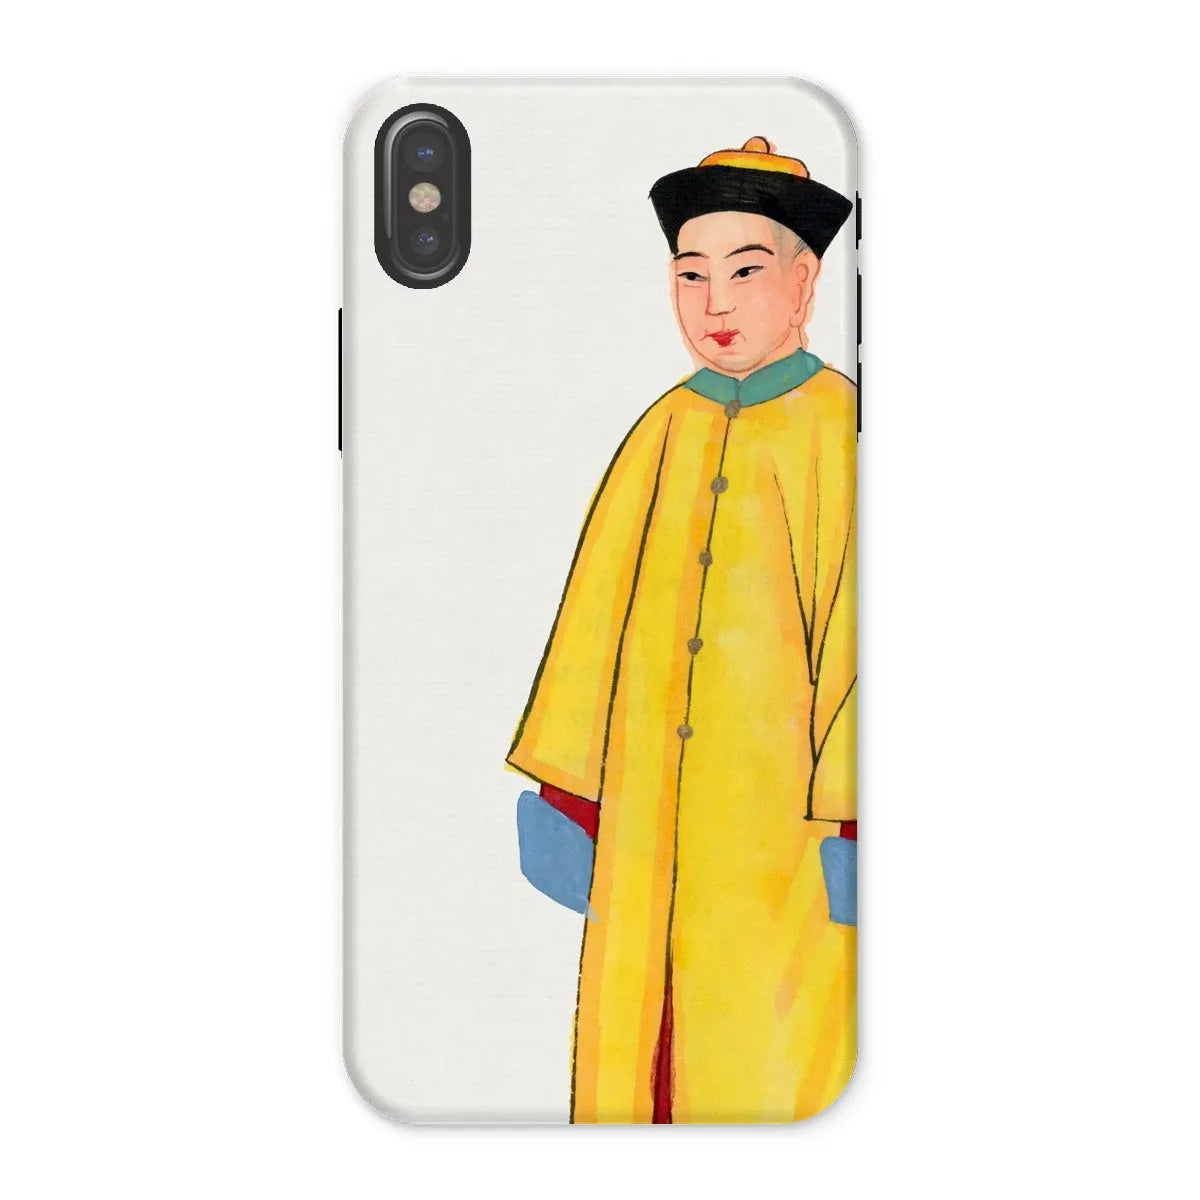 Priest In Yellow Robes - Chinese Aesthetic Art Phone Case - Iphone x / Matte - Mobile Phone Cases - Aesthetic Art